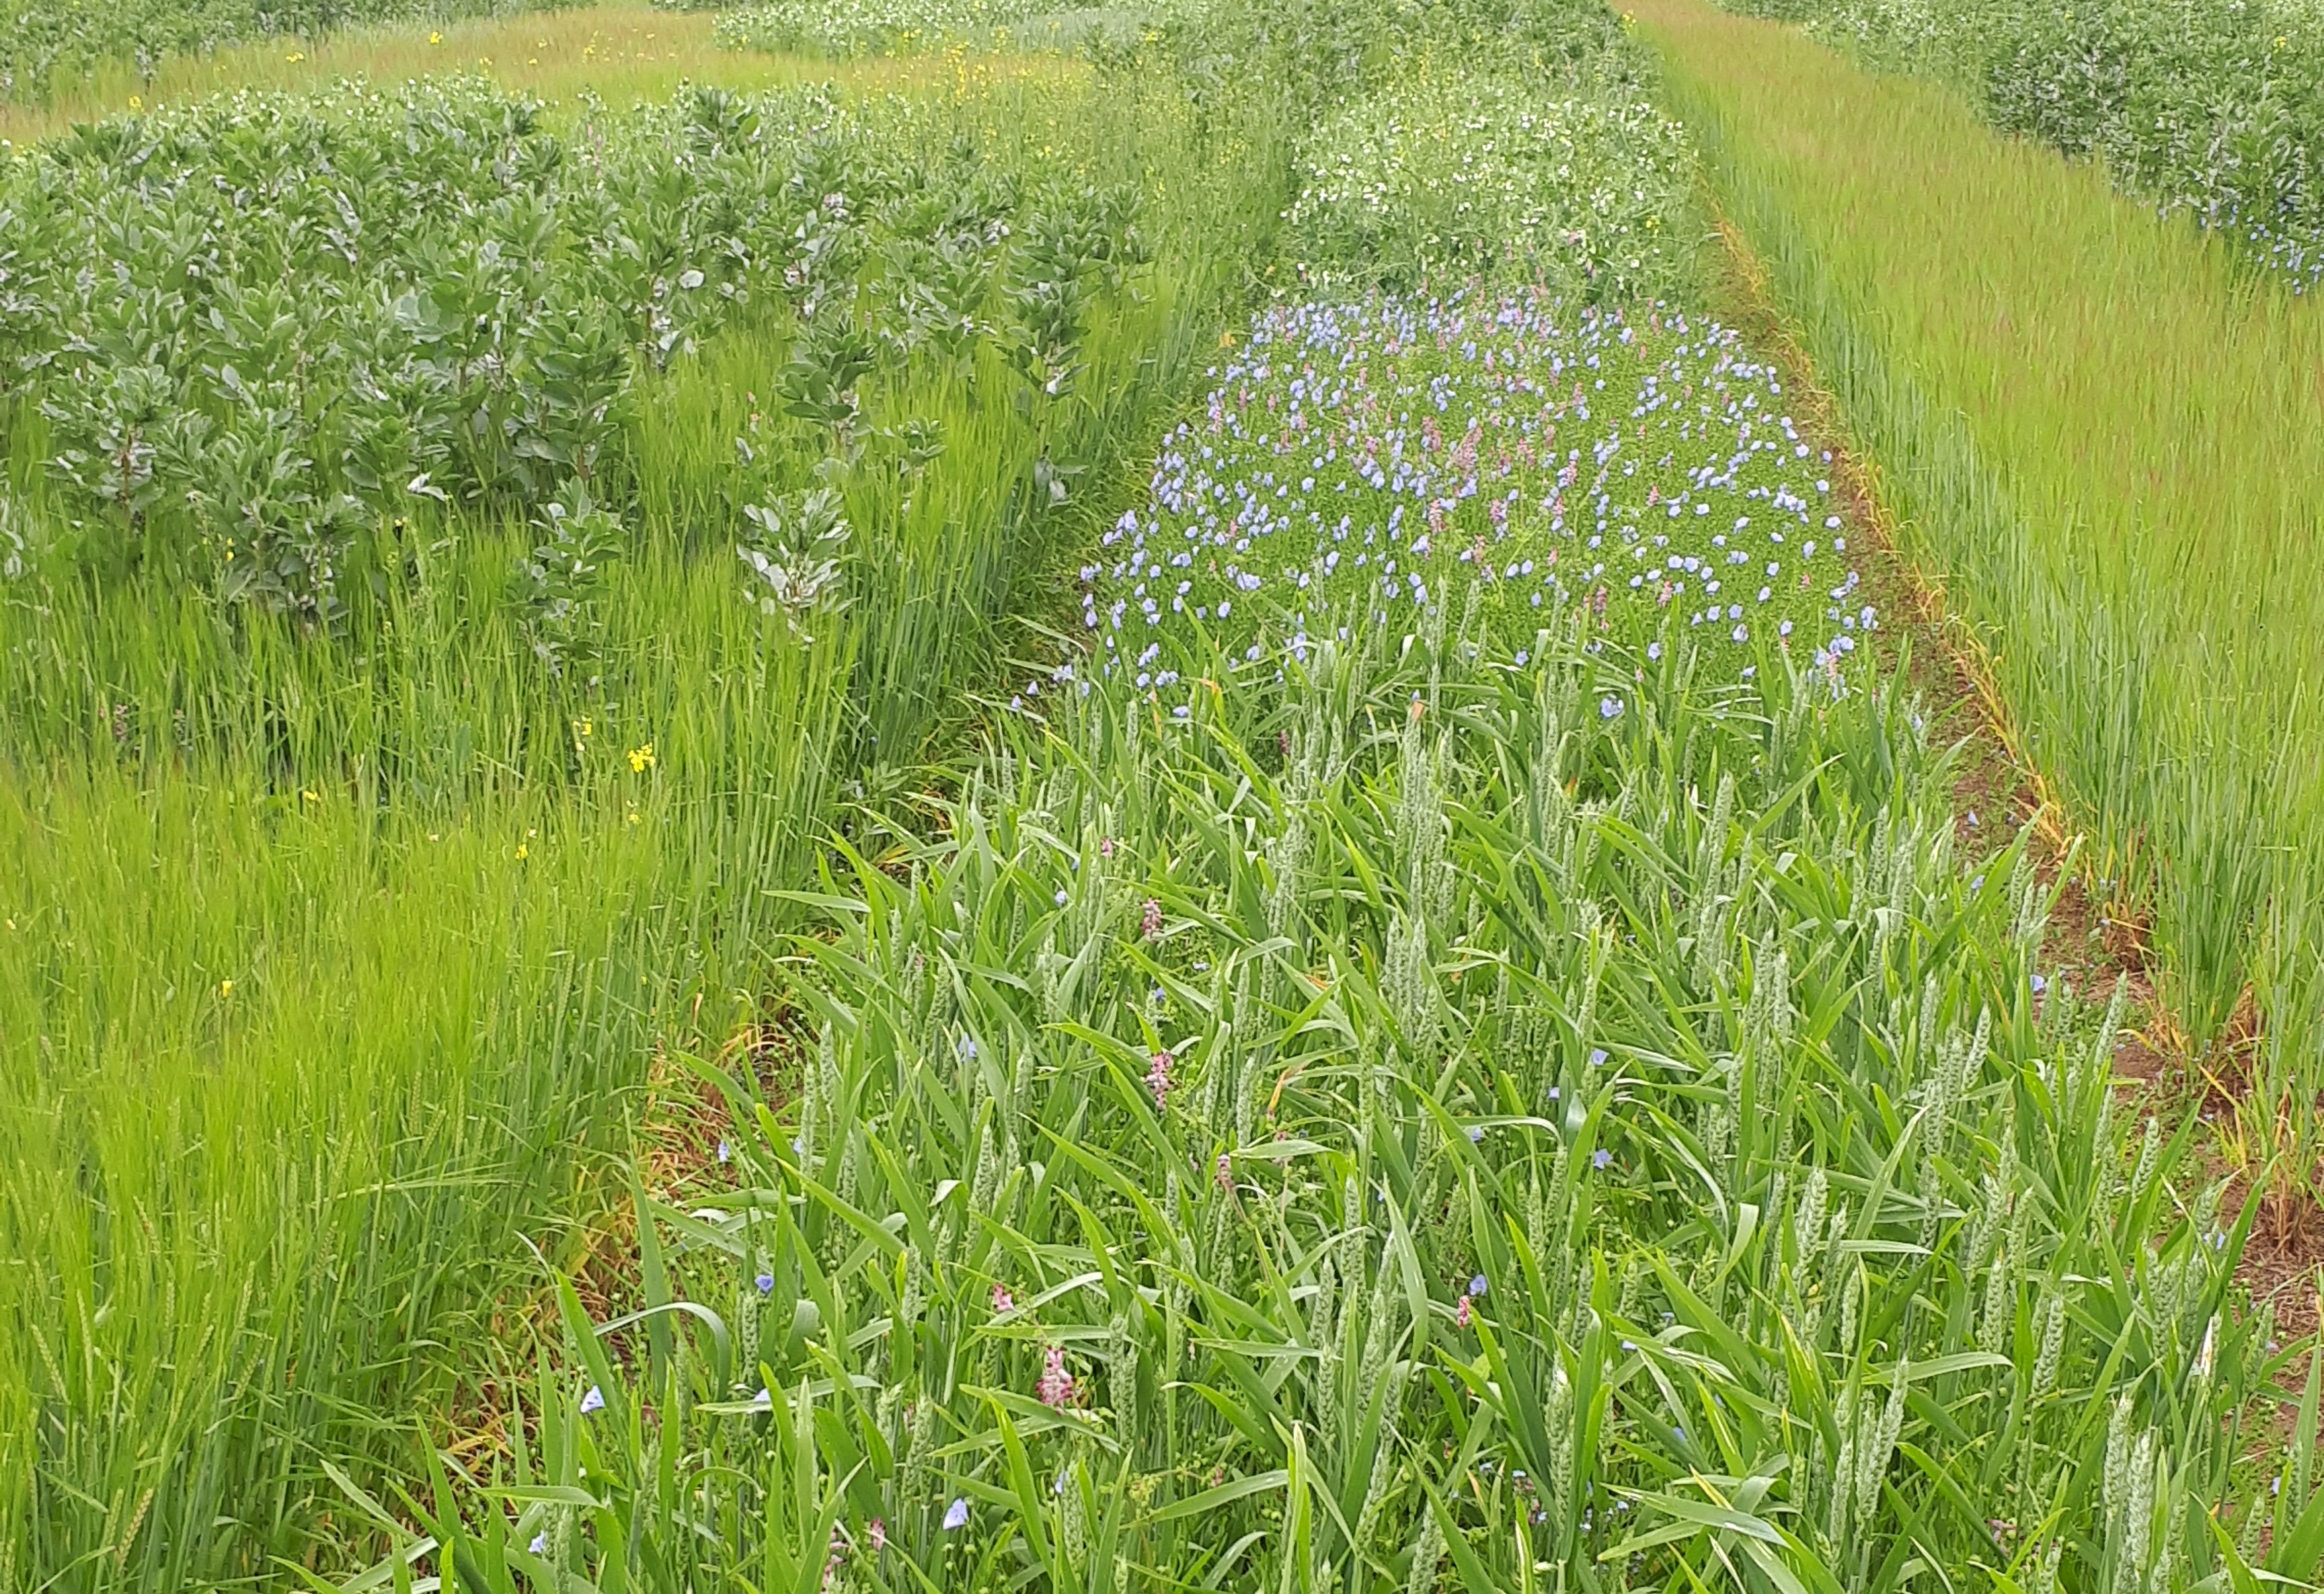 intercropping research